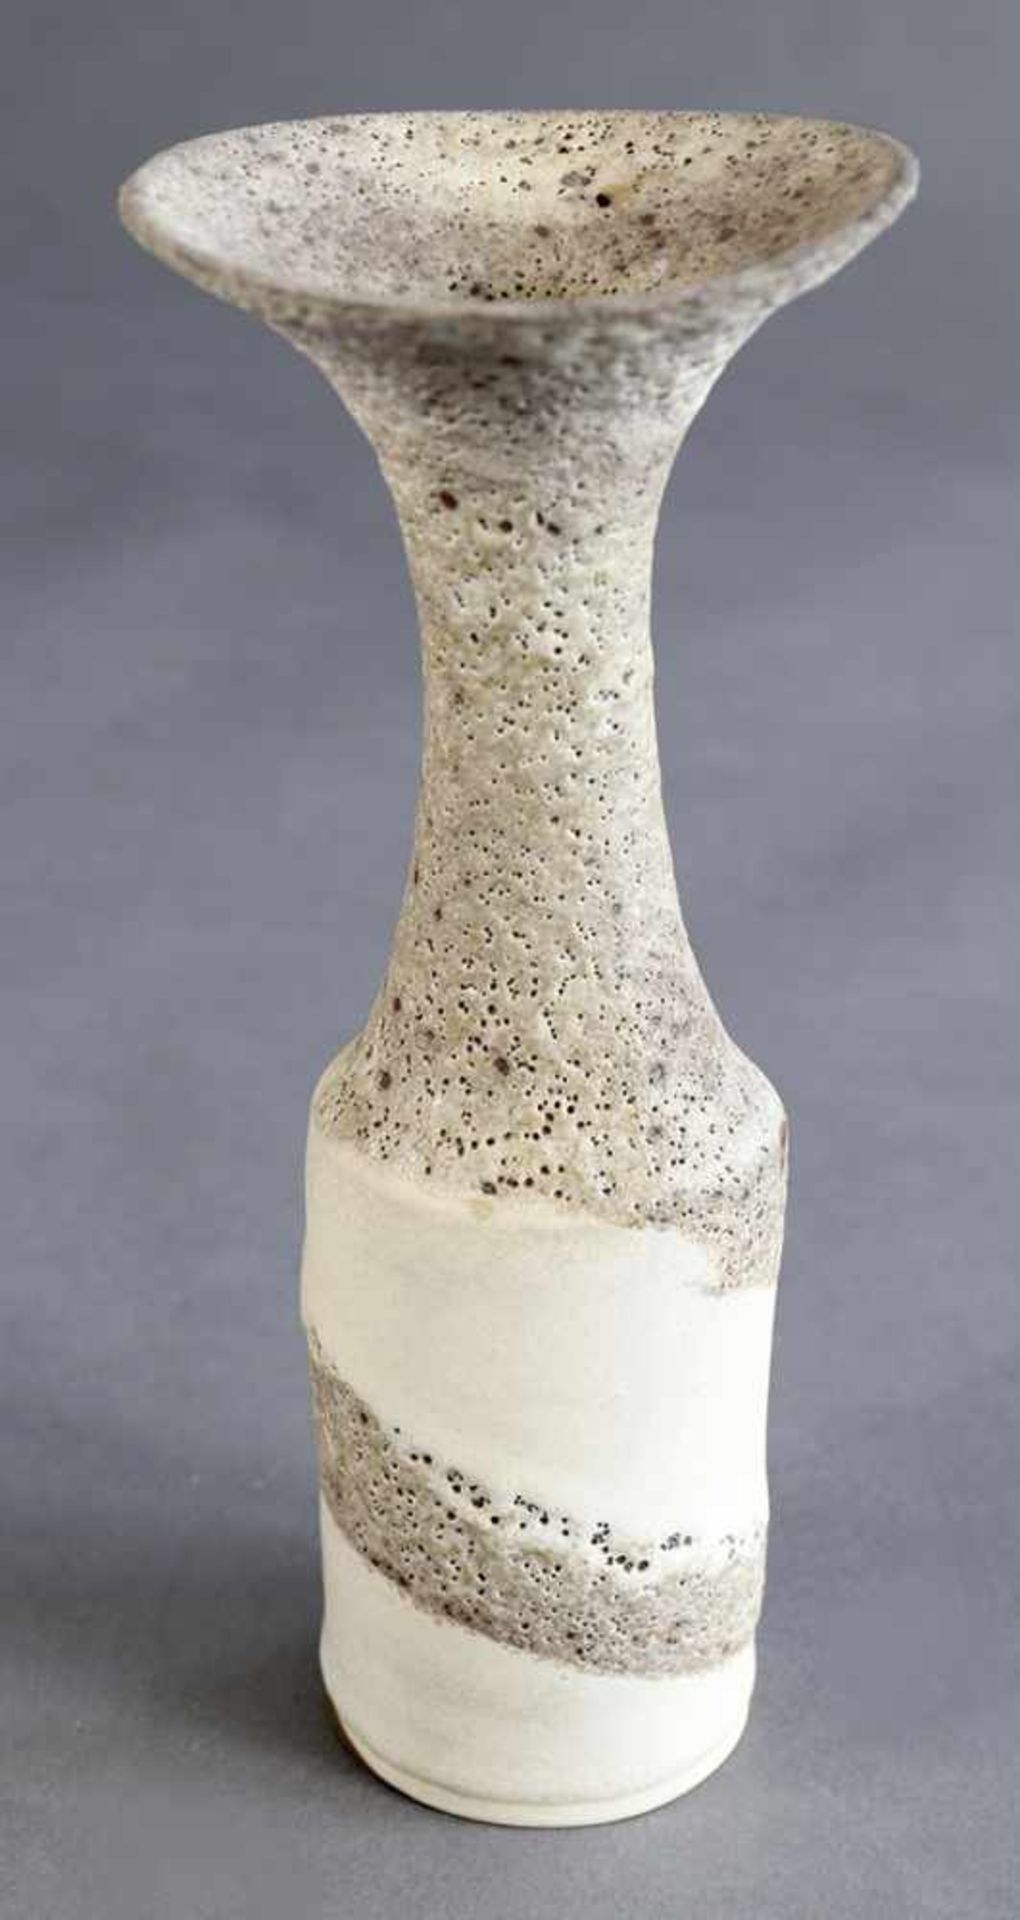 Lucie RieLucie Rie, VaseVase. Stoneware. Spiral decor all around the wall in beige-gray tones and